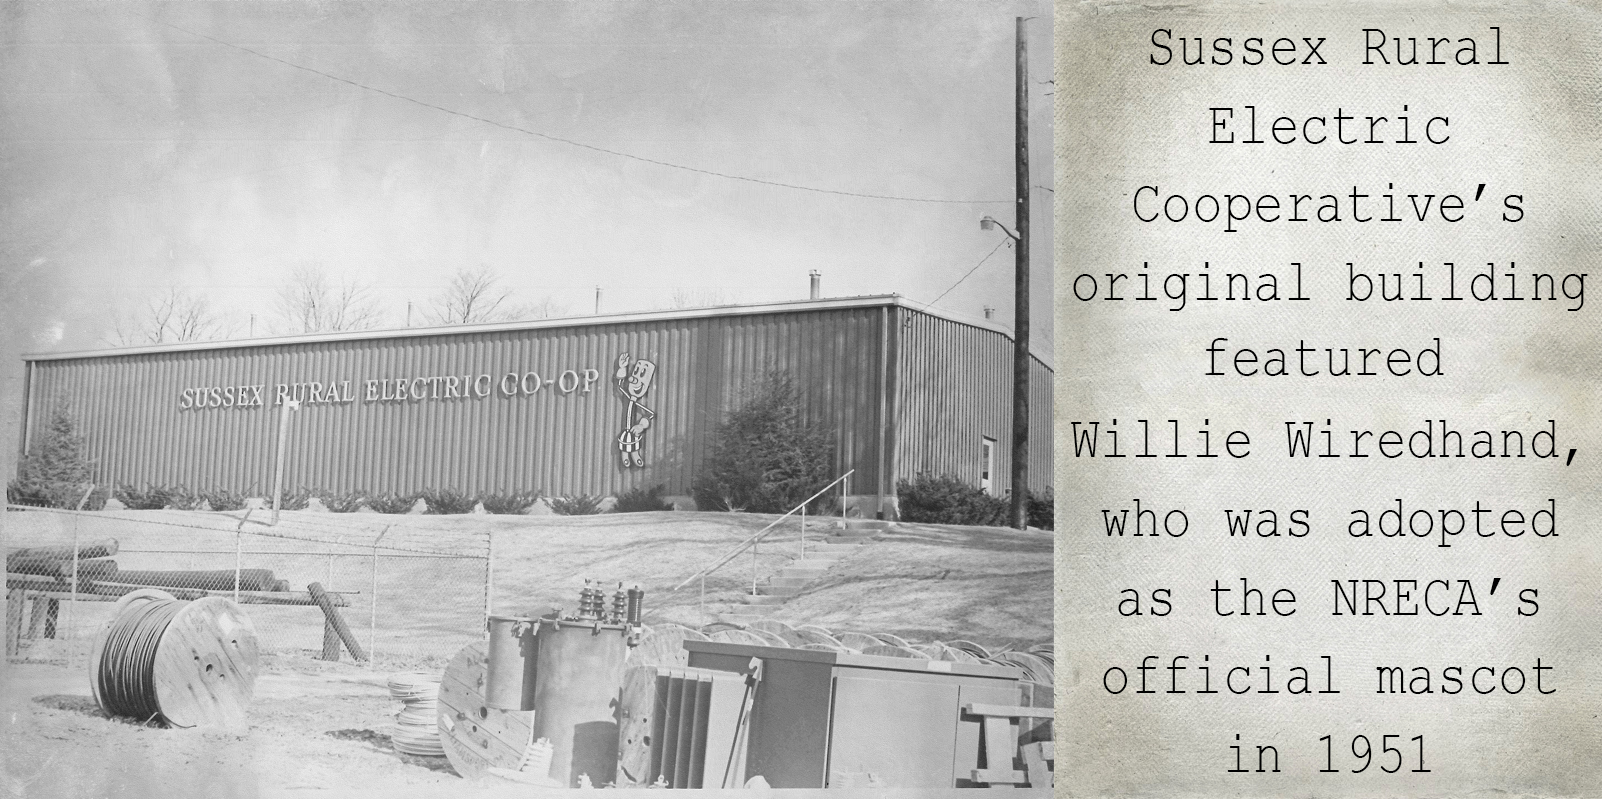 Sussex Rural Electric Cooperative's original building eventually featured the image of Willie Wiredhand, who was adopted as the NRECA's official mascot in 1951